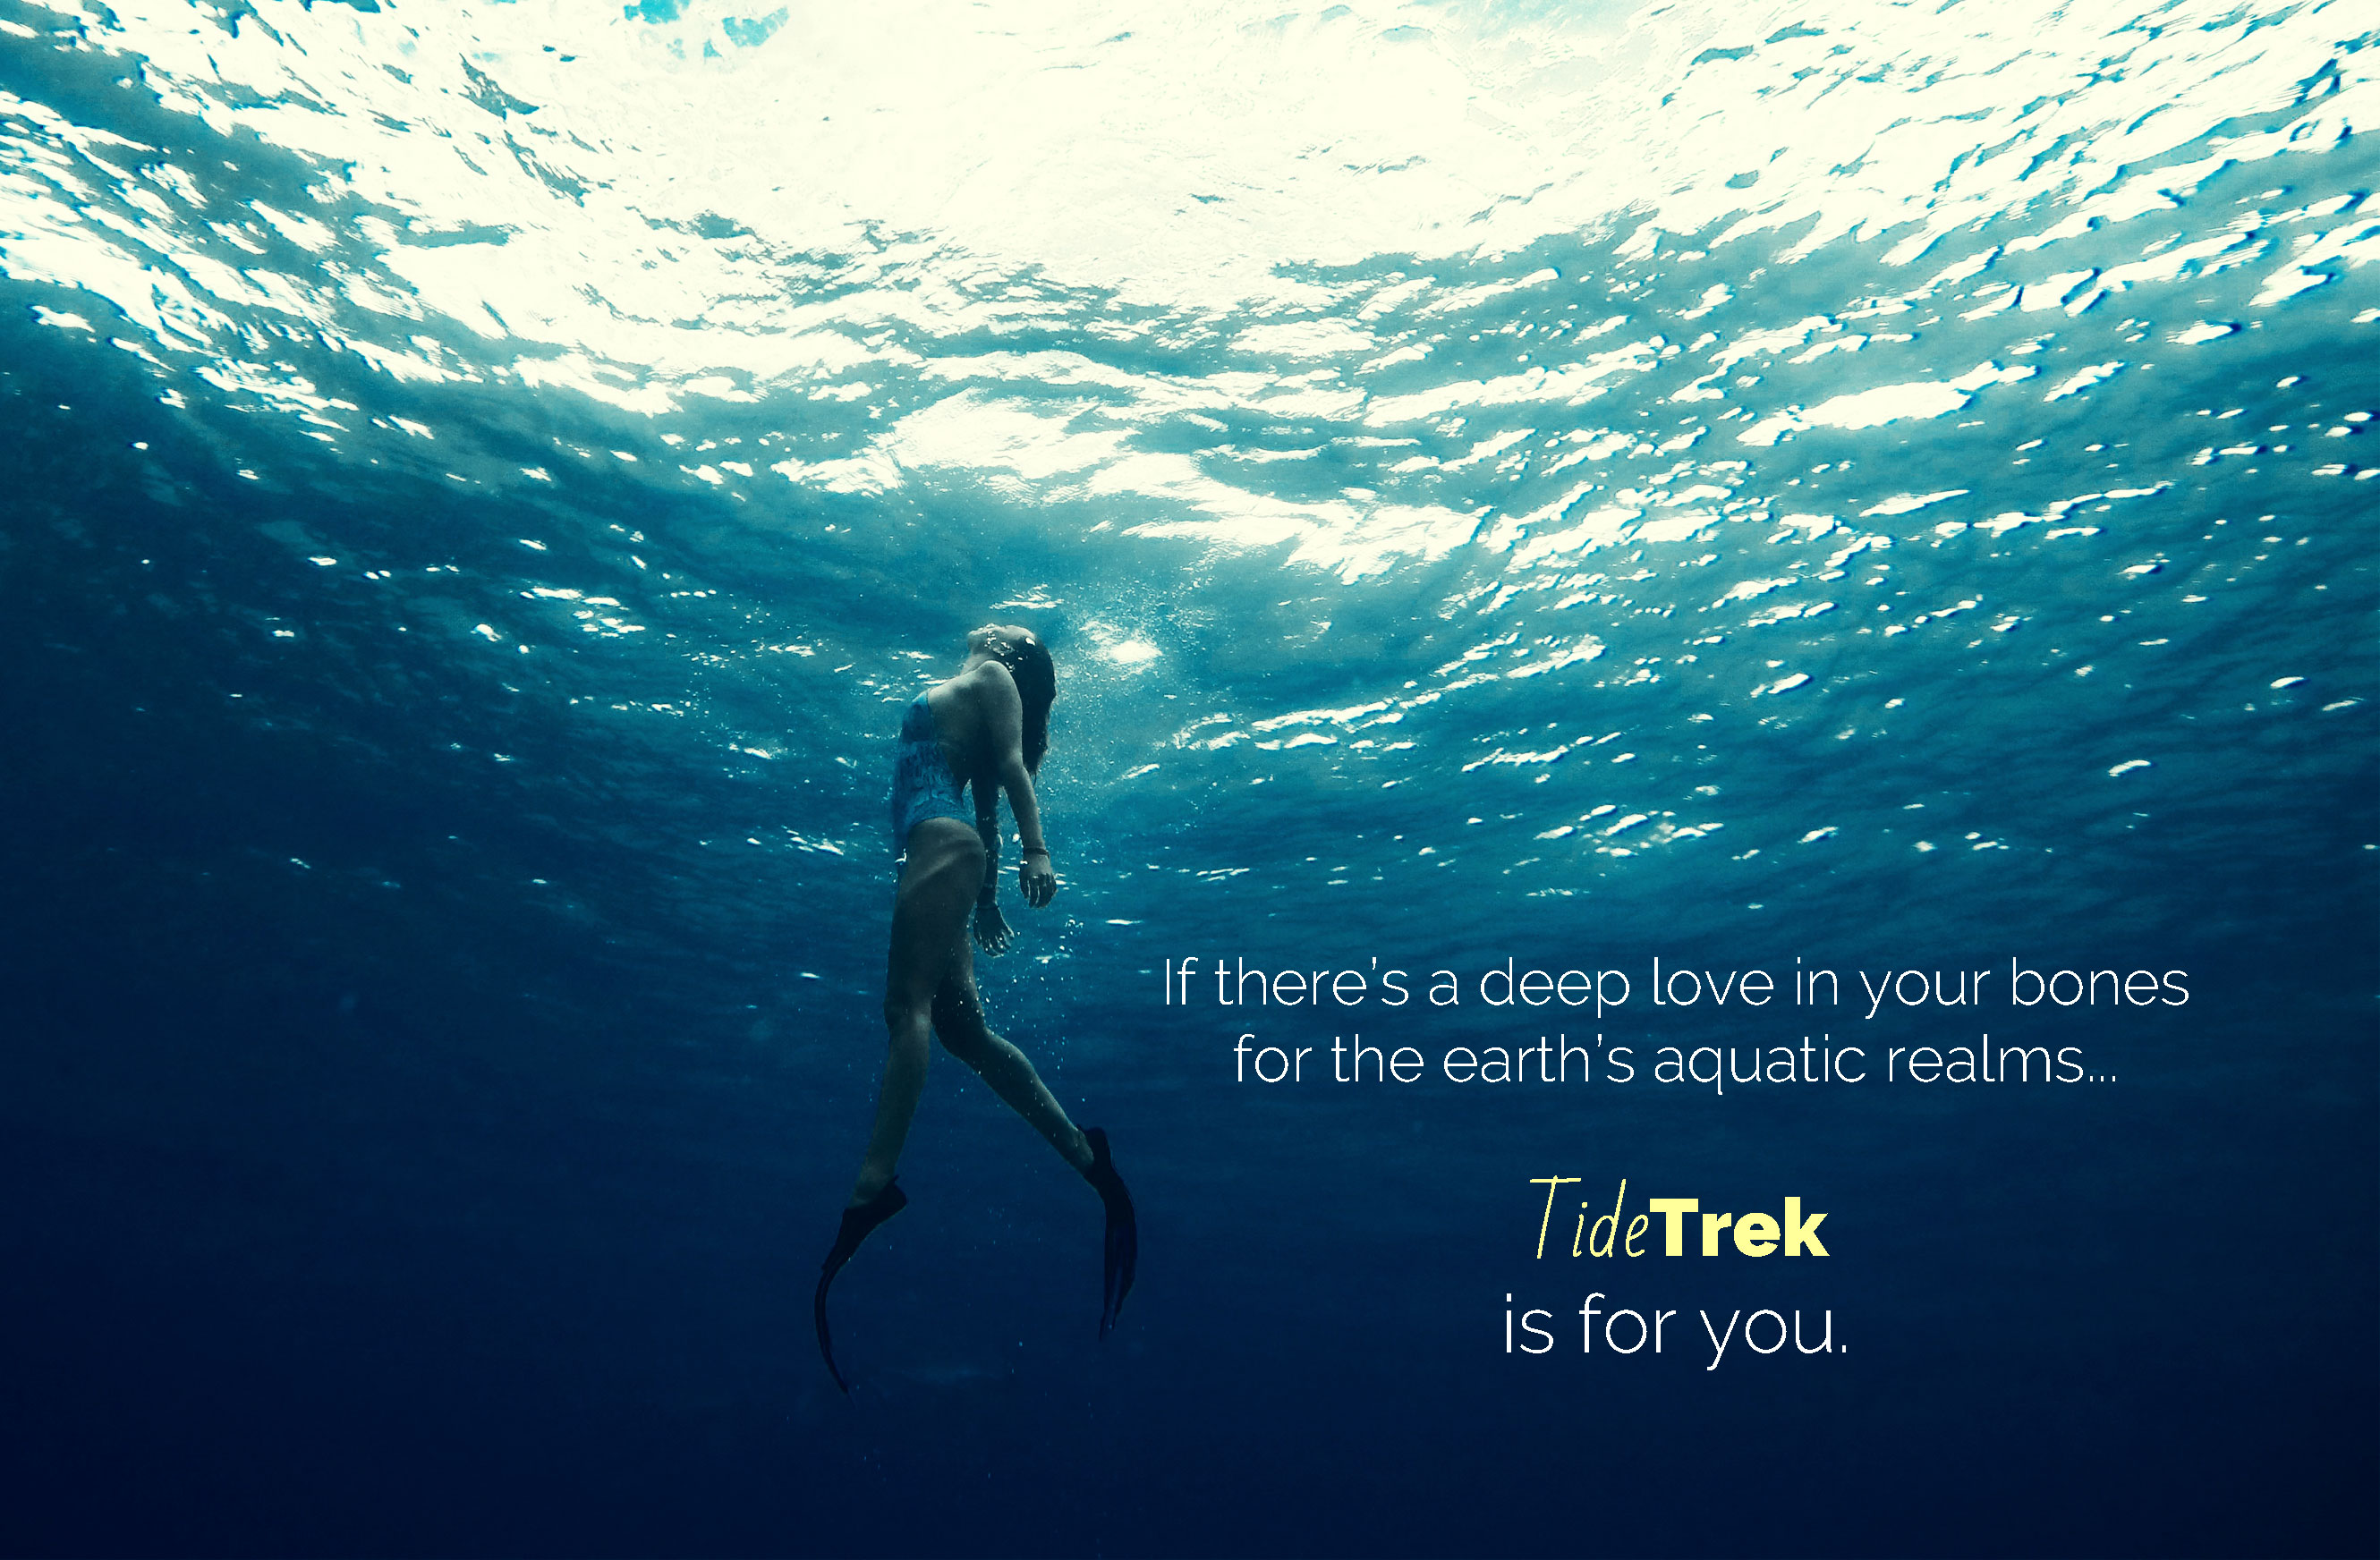 Photo of a woman underwater freediving towards the surface with overlaid text, "If there's a deep love in your bones for the earth's aquatic realms, Tide Trek is for you."